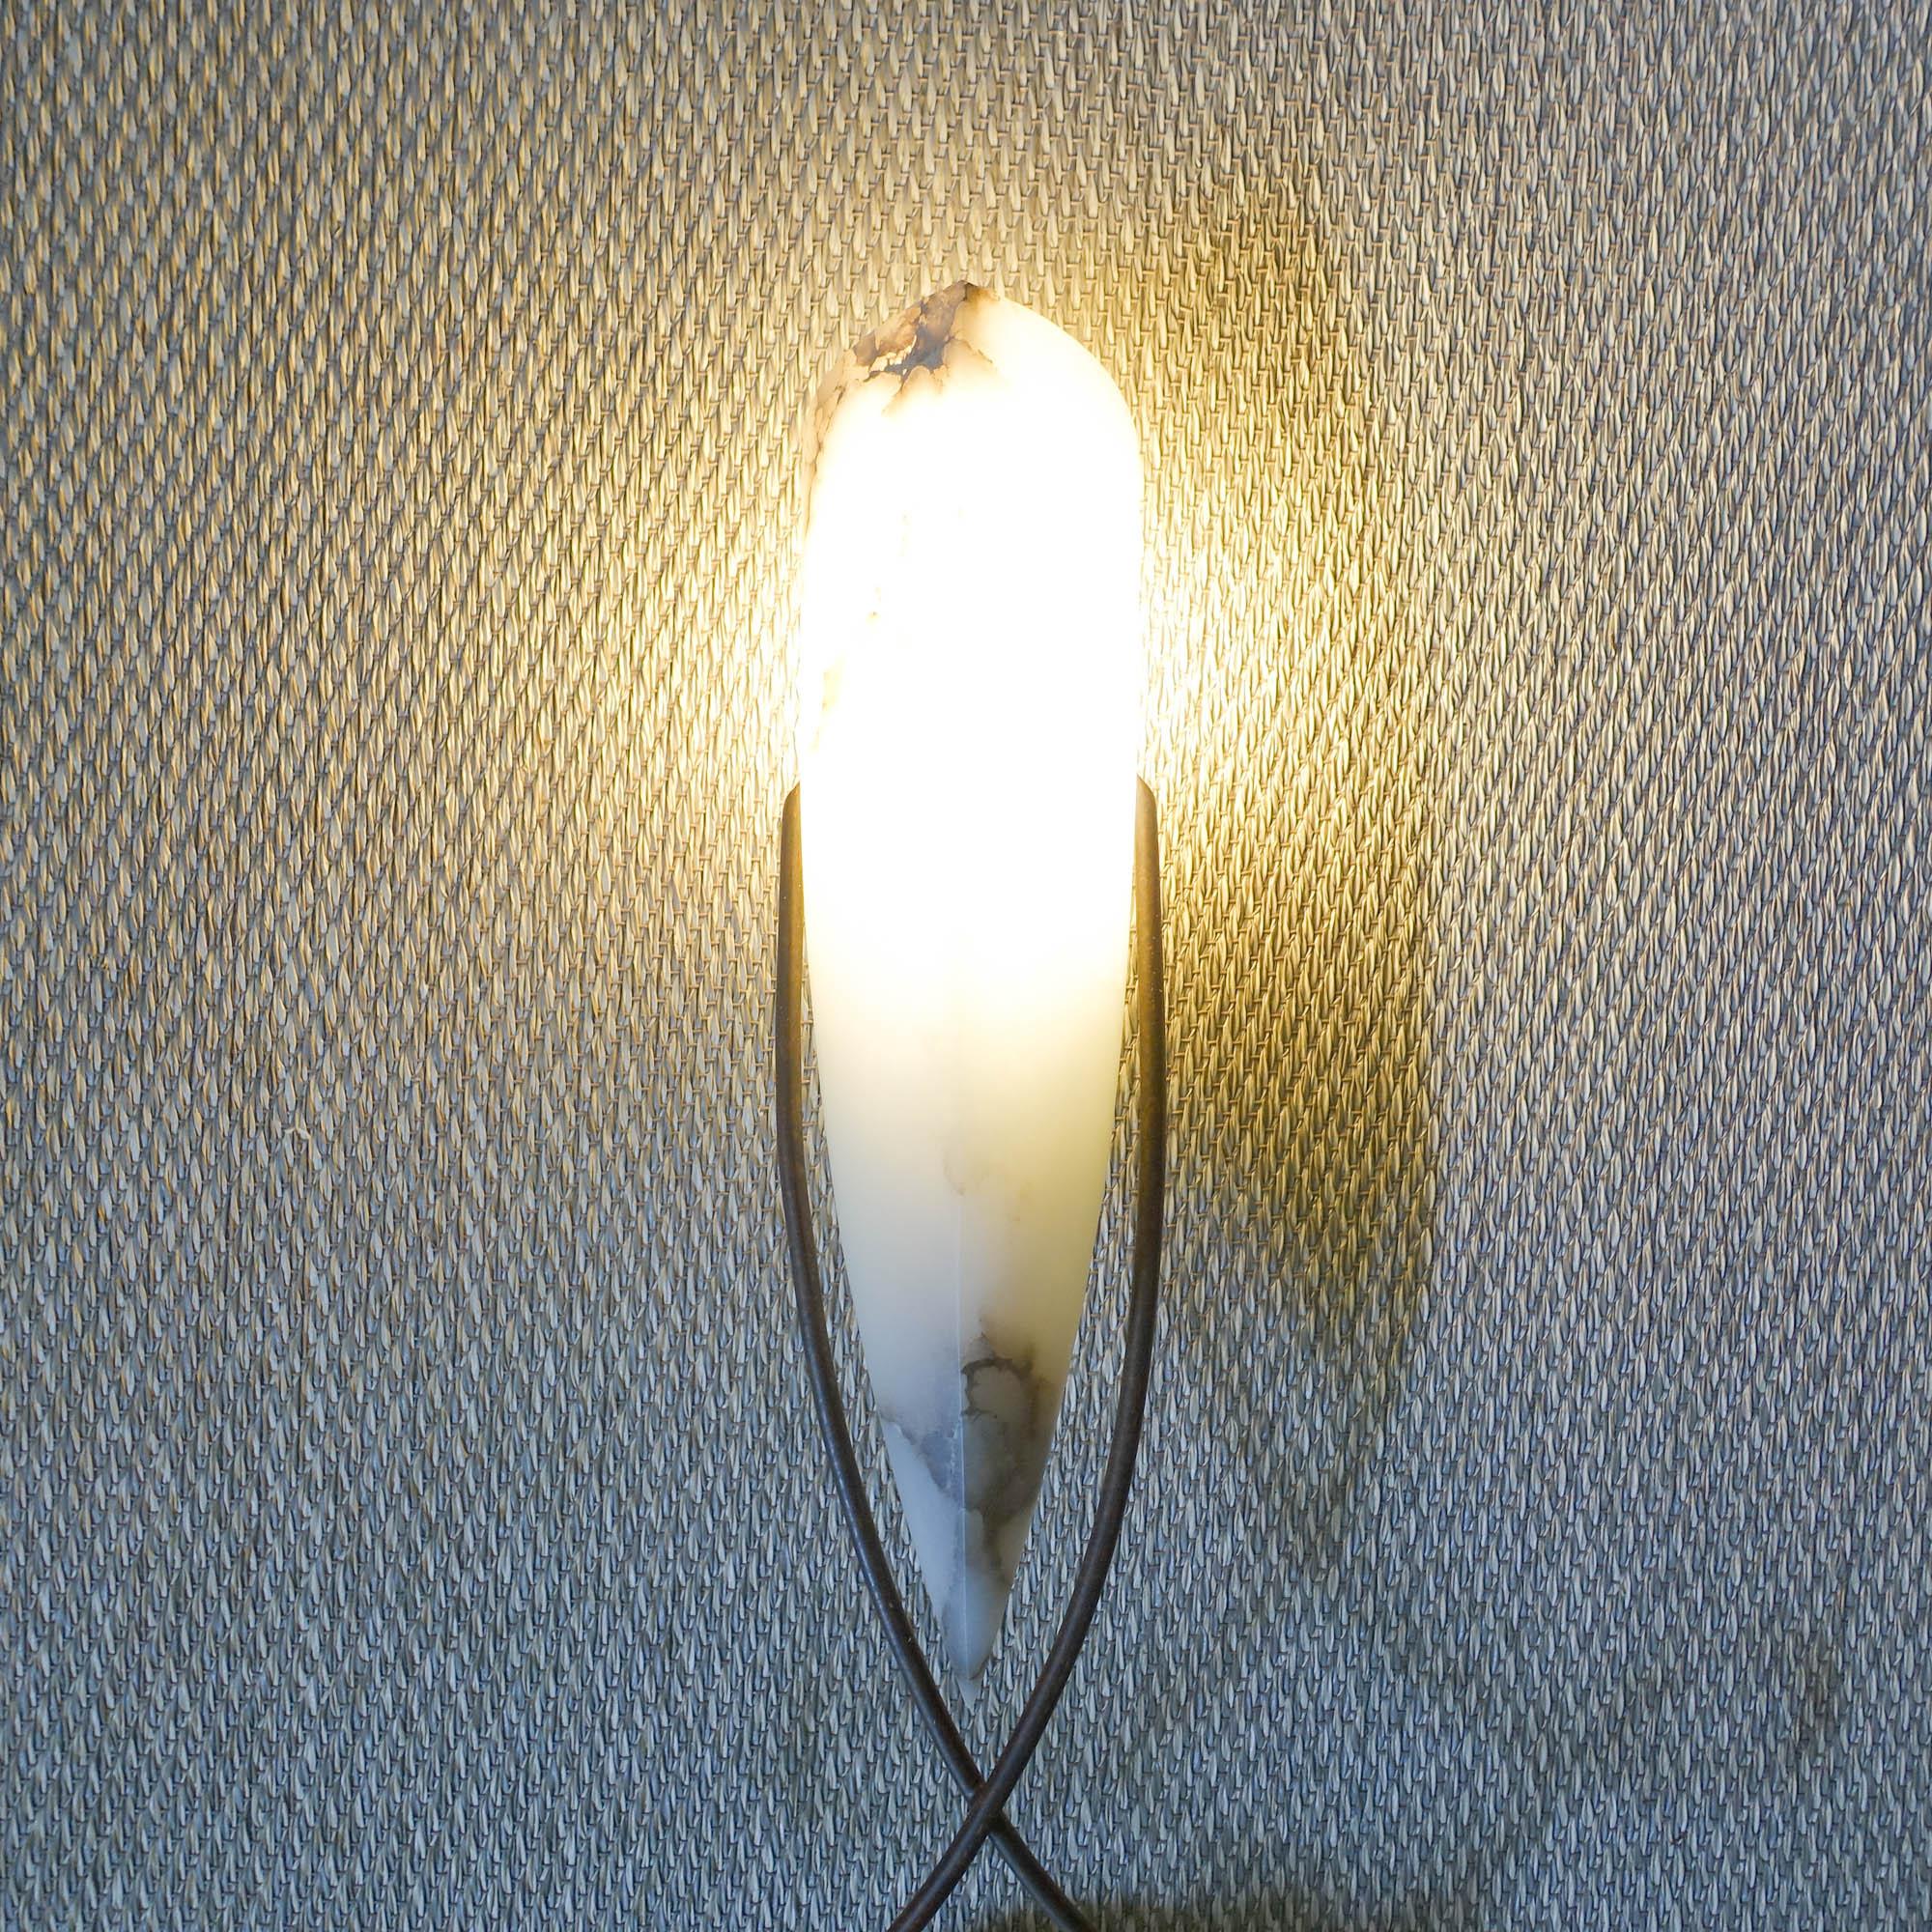 Italian Pair of Terzani Louvre Wall Sconces, 1980's For Sale